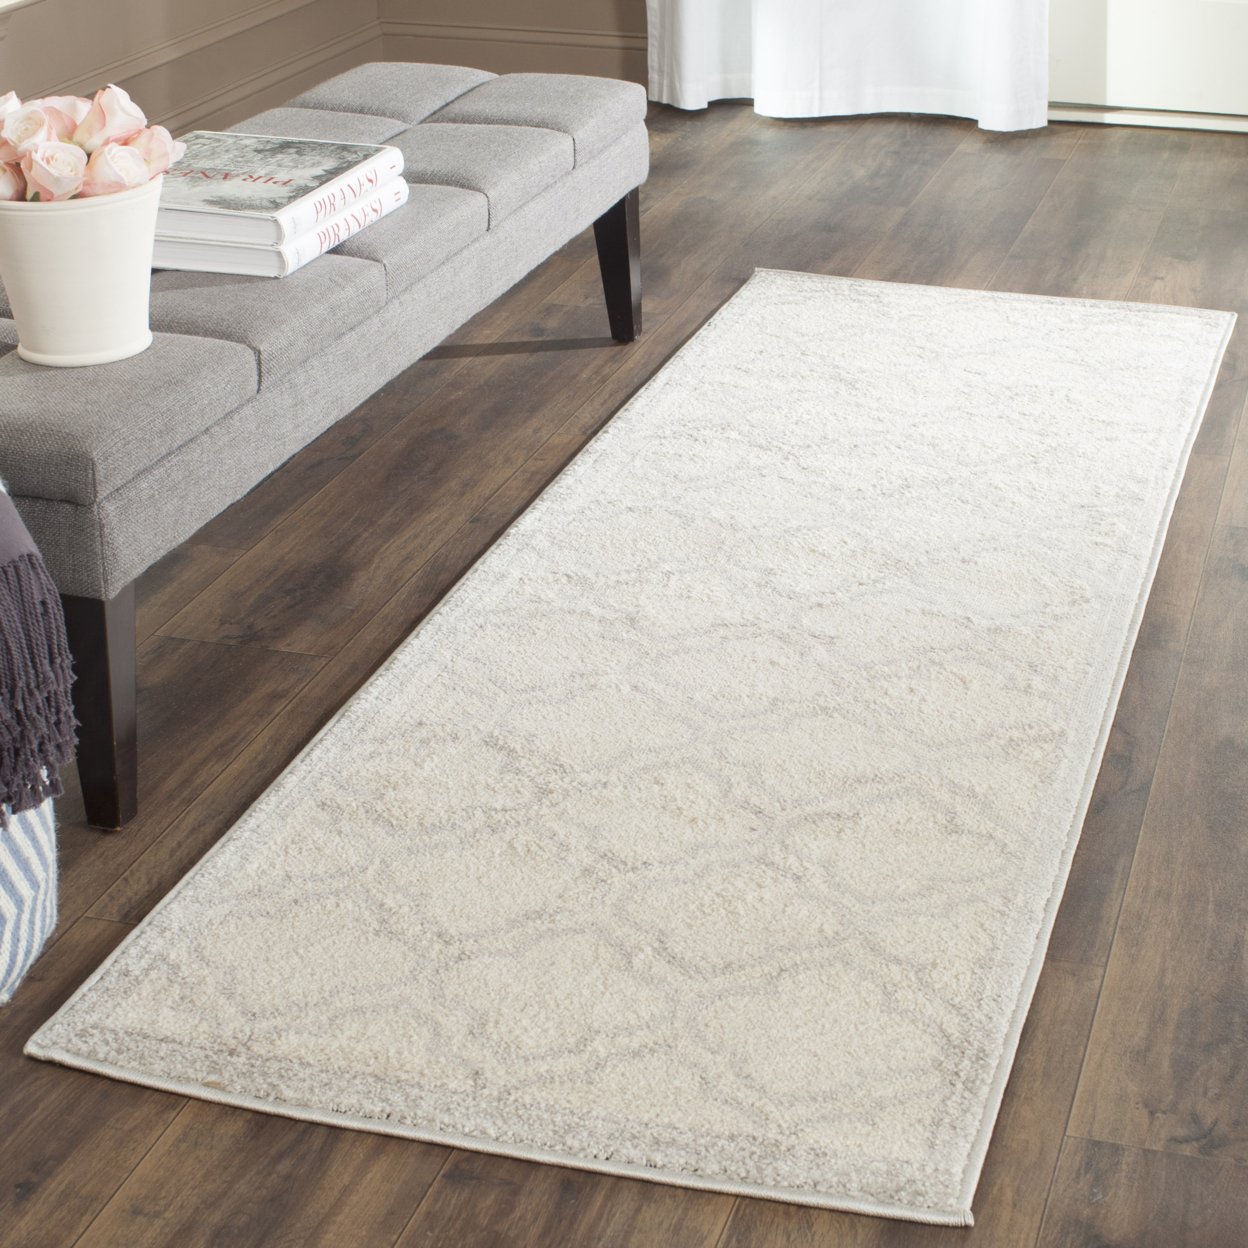 SAFAVIEH Amherst Collection AMT412E Ivory/Light Grey Rug - 9' X 12'